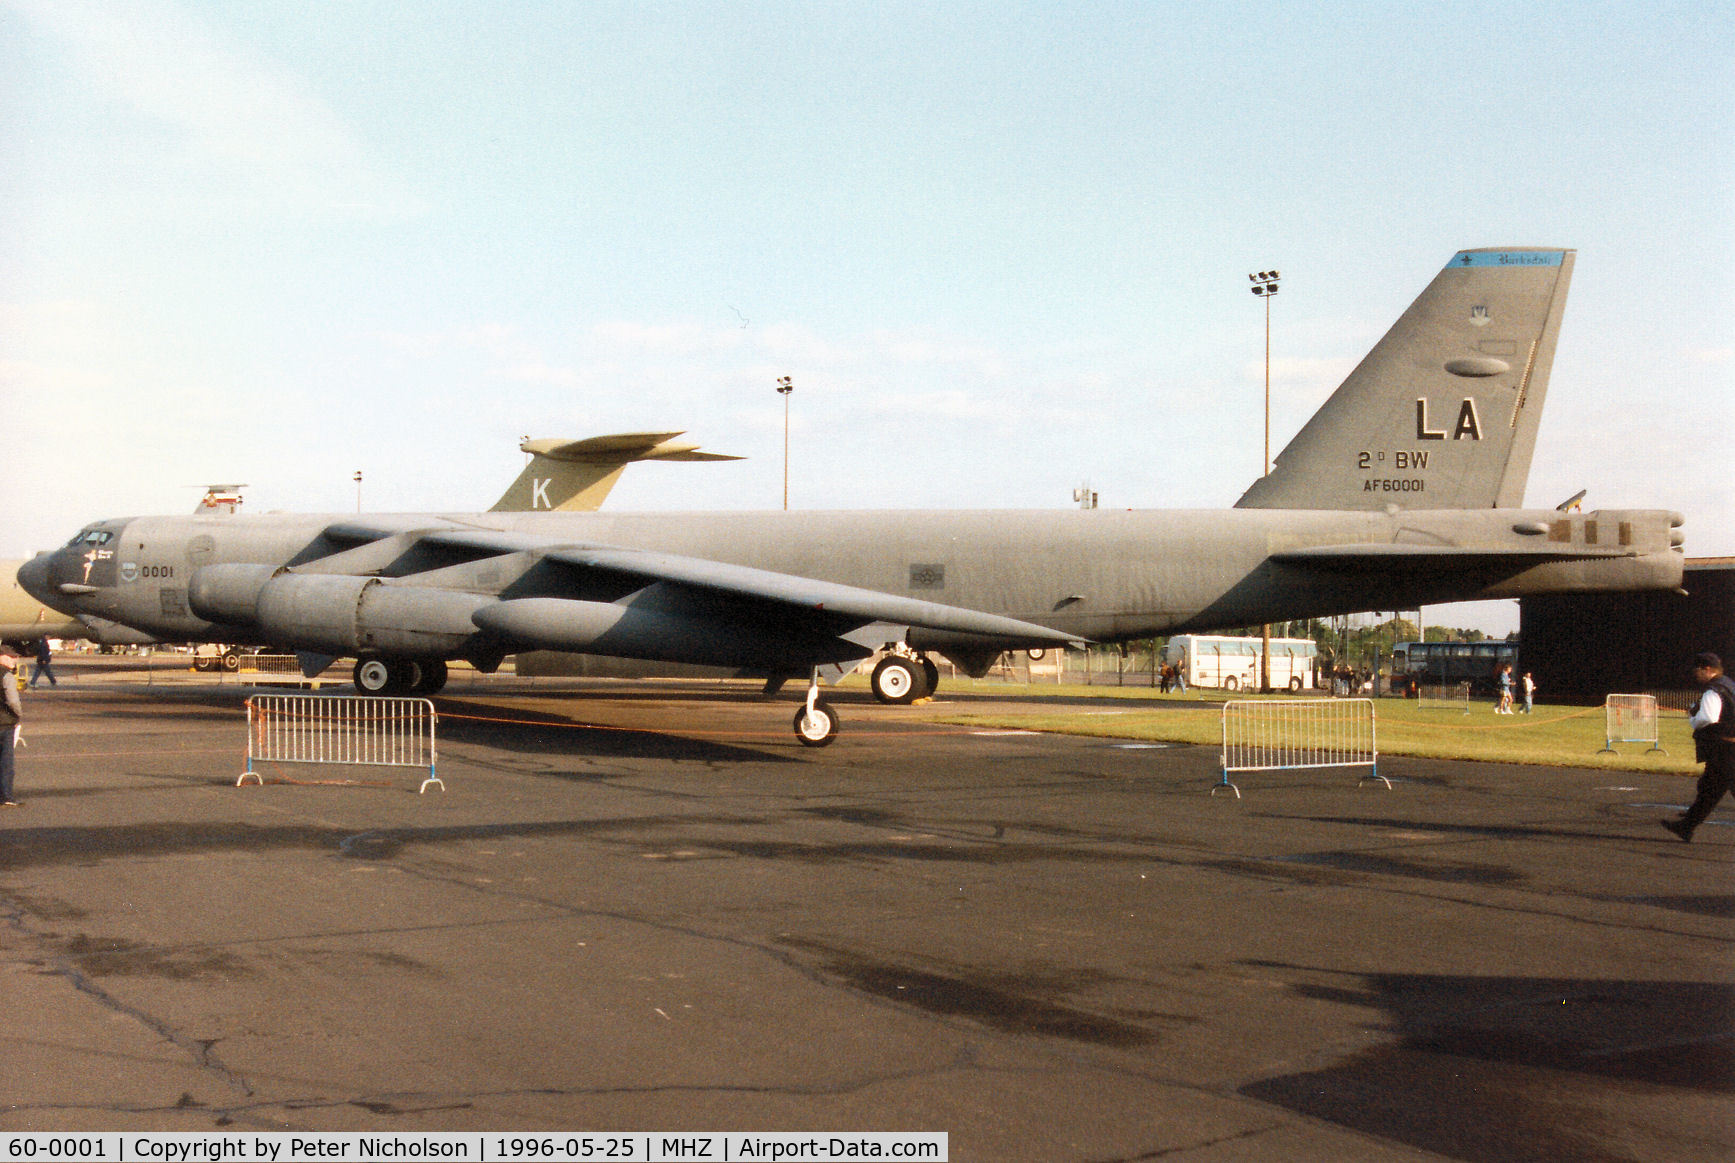 60-0001, 1960 Boeing B-52H Stratofortress C/N 464366, B-52H Stratofortress of 20th Bomb Squadron/2nd Bombardment Wing on display at the 1996 RAF Mildenhall Air Fete.